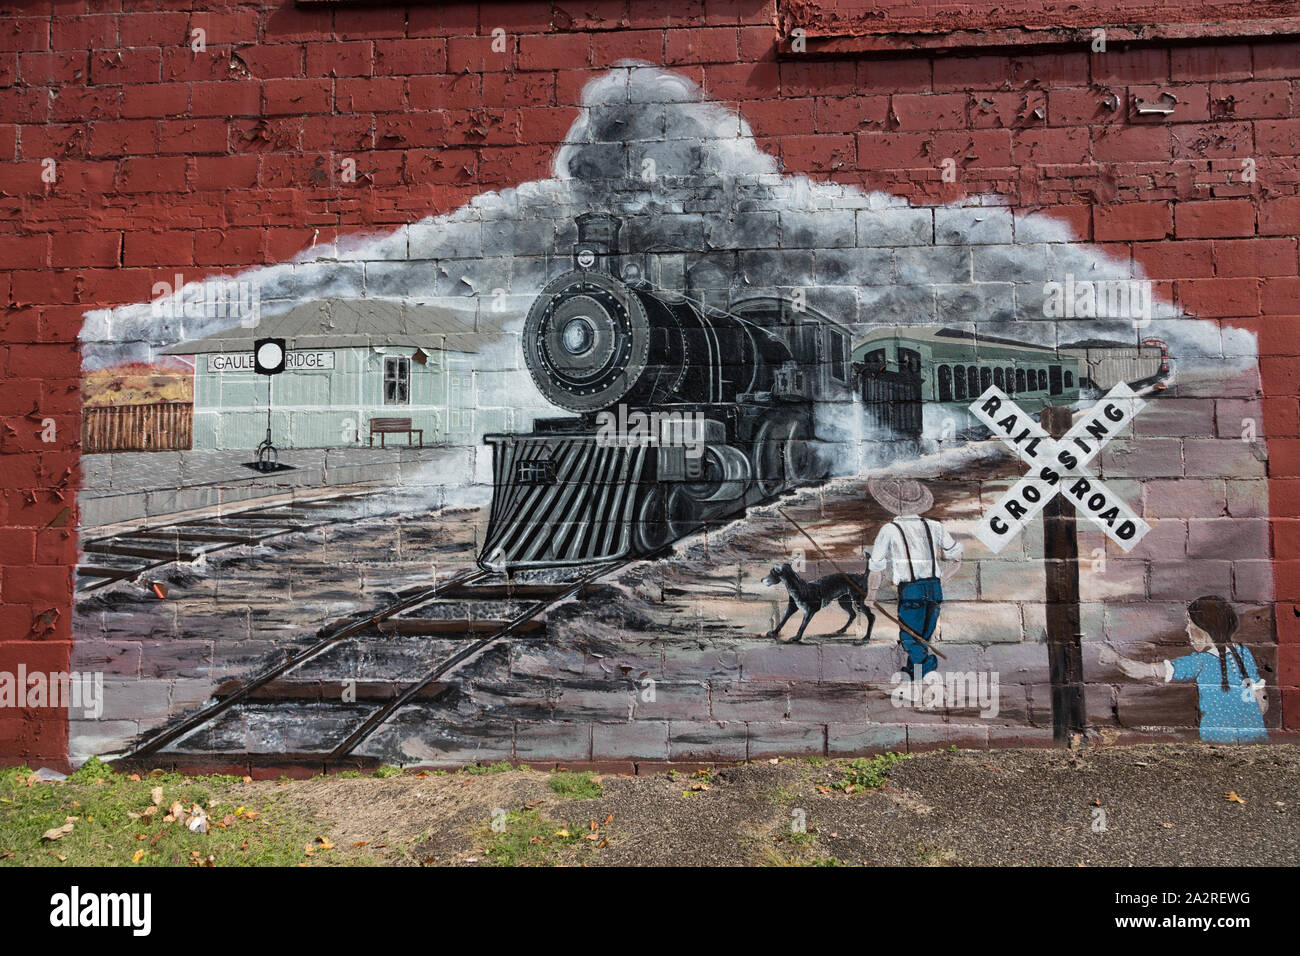 Railroad-themed mural in the town of Gauley Bridge, West Virginia Stock Photo